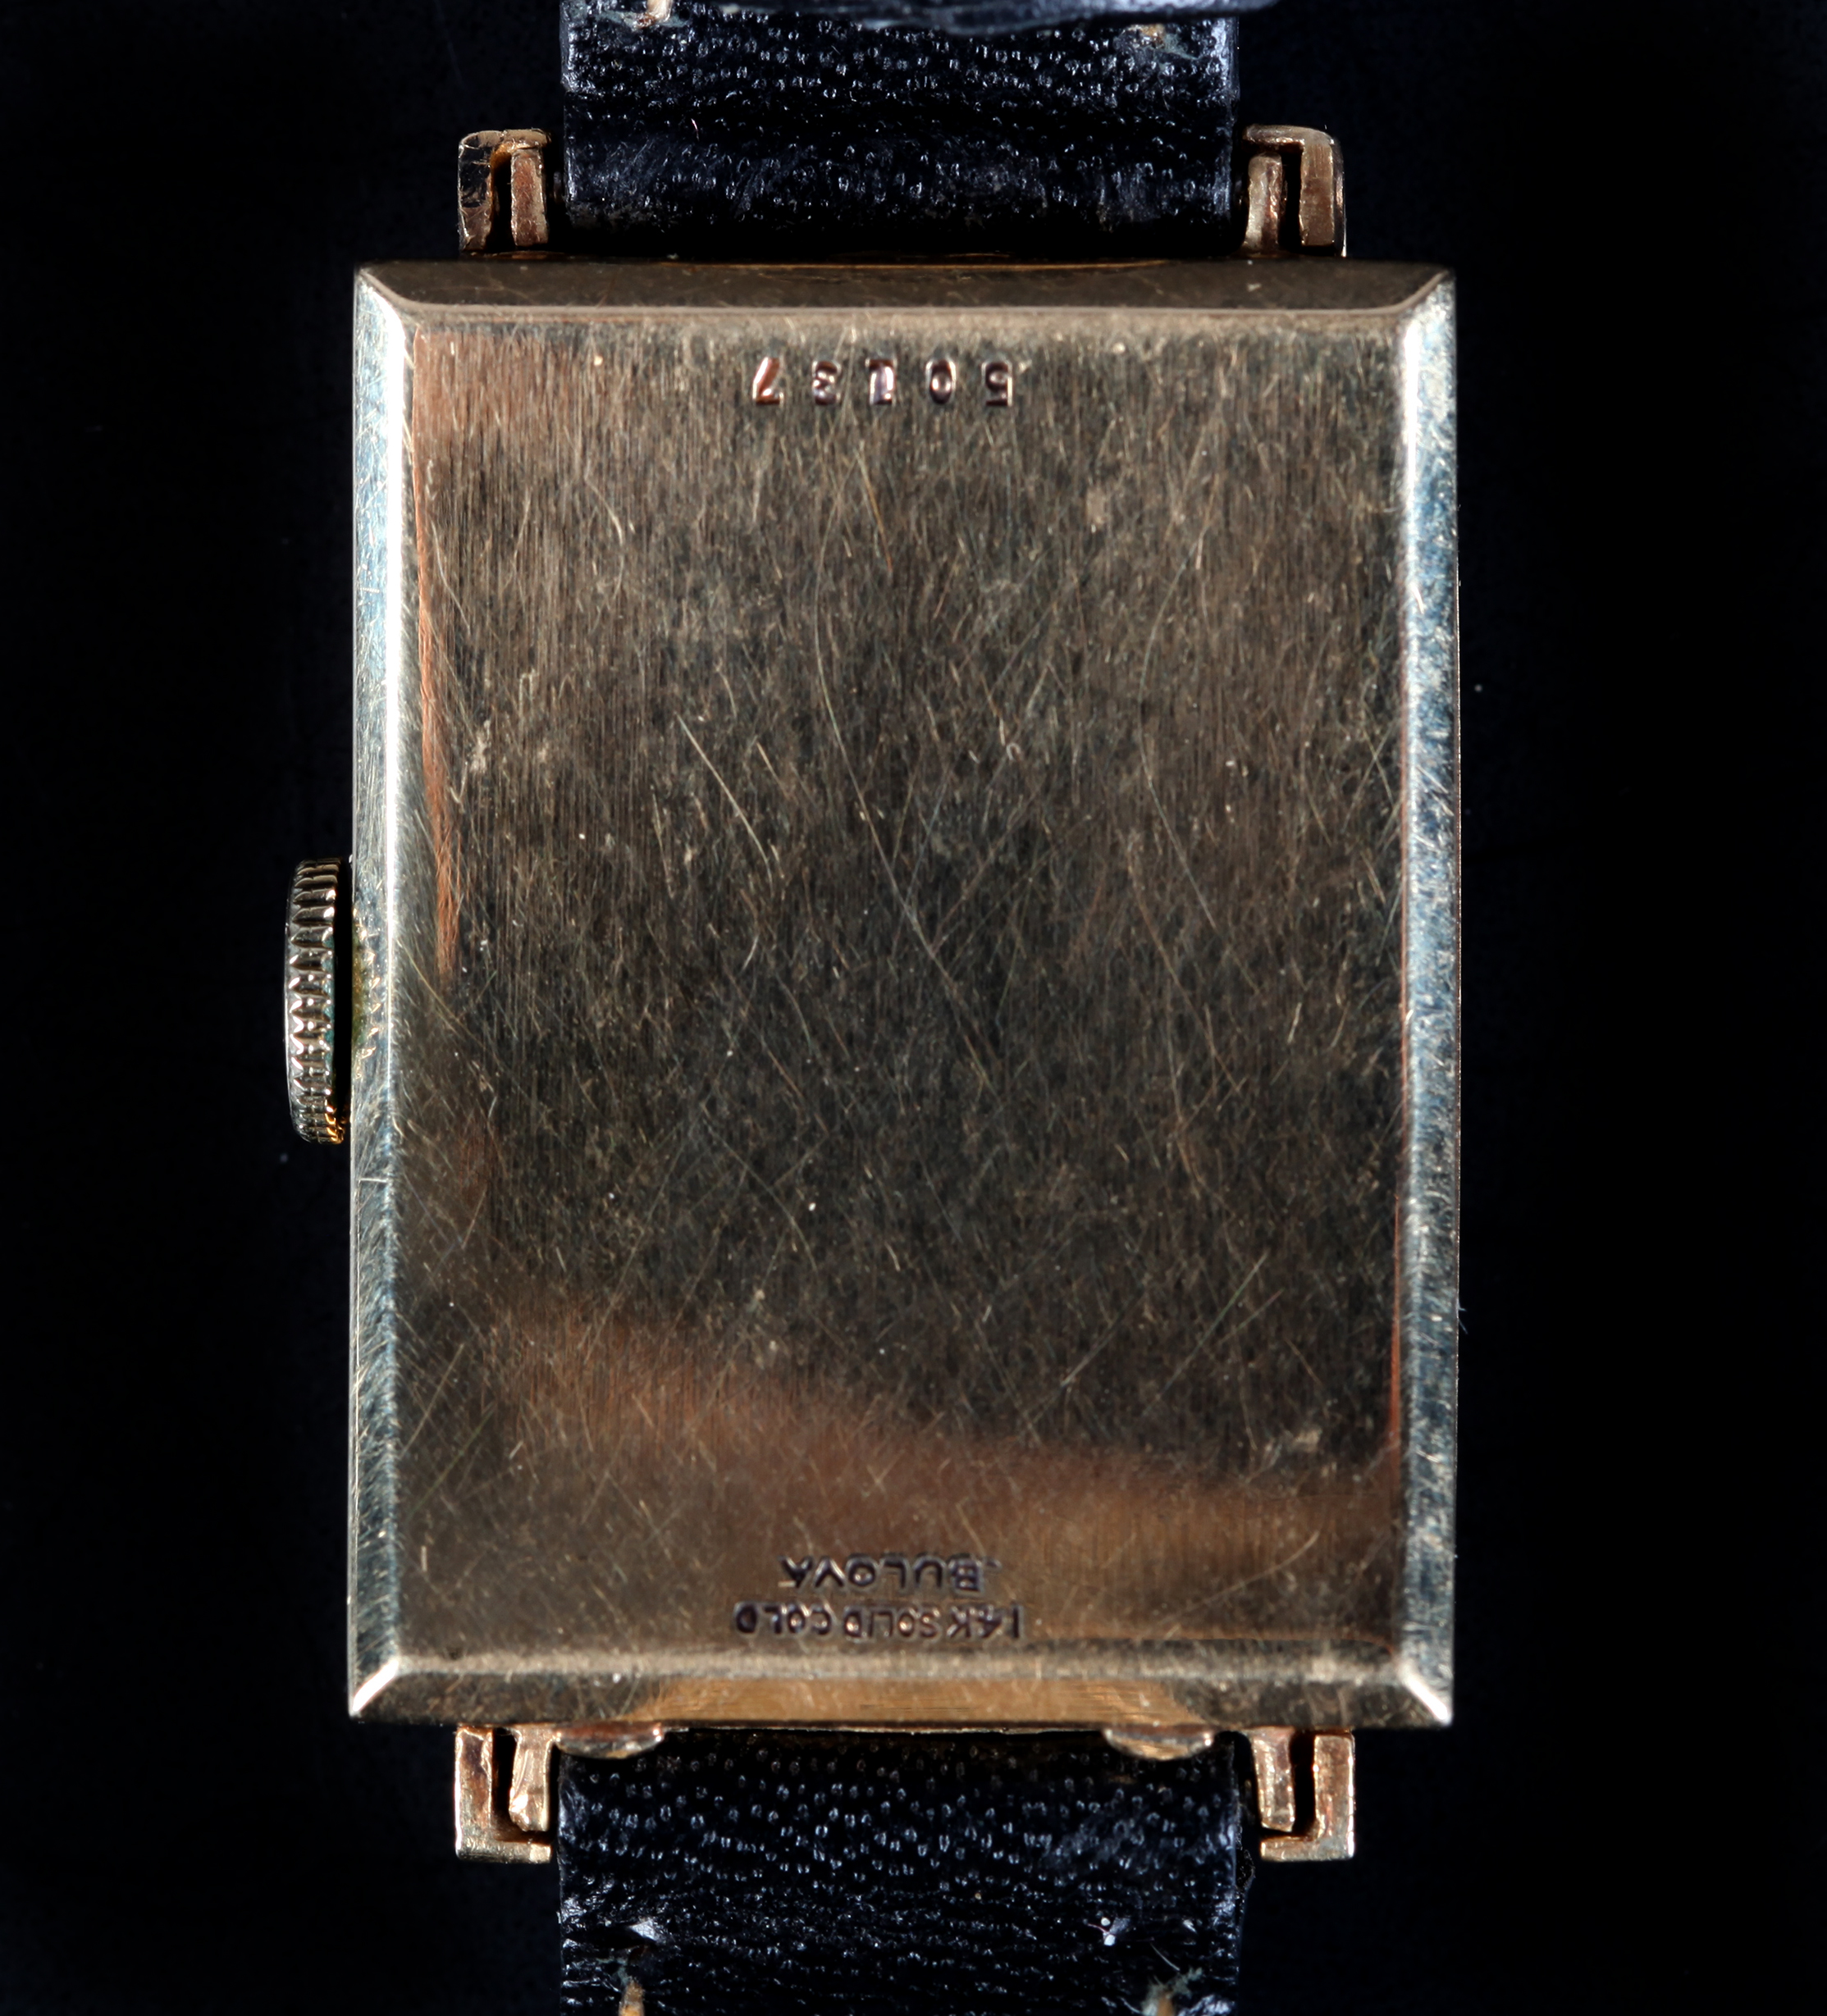 A BULOVA GENTLEMAN'S MANUAL ART DECO WRISTWATCH c.1930 in 14ct gold case No 50137 21 jewelled - Image 2 of 2